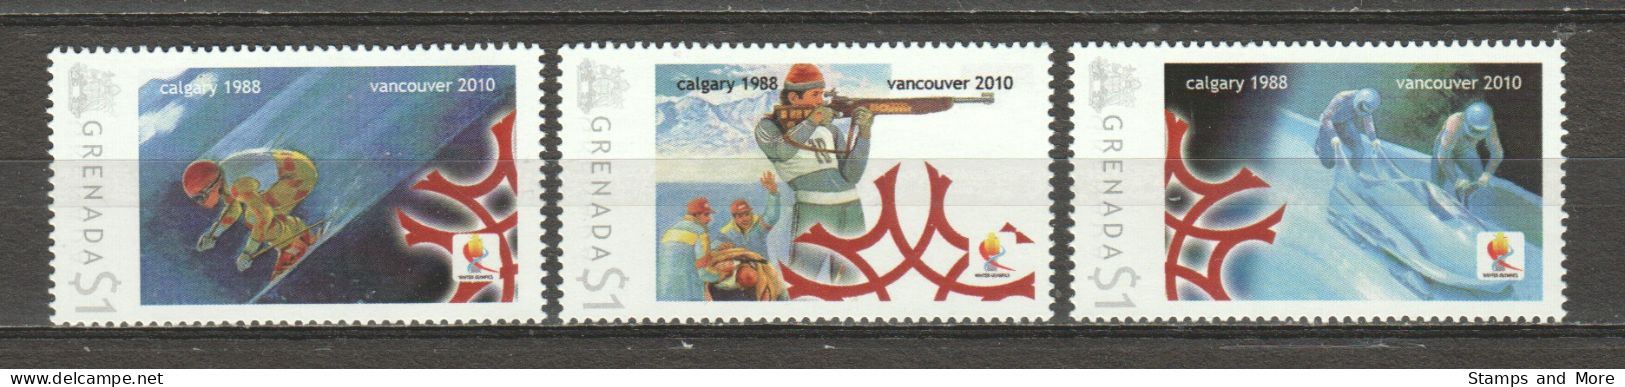 Grenada - Limited Edition Serie 15 MNH - WINTER OLYMPICS VANCOUVER 2010 - CALGARY 1988 - Hiver 2010: Vancouver